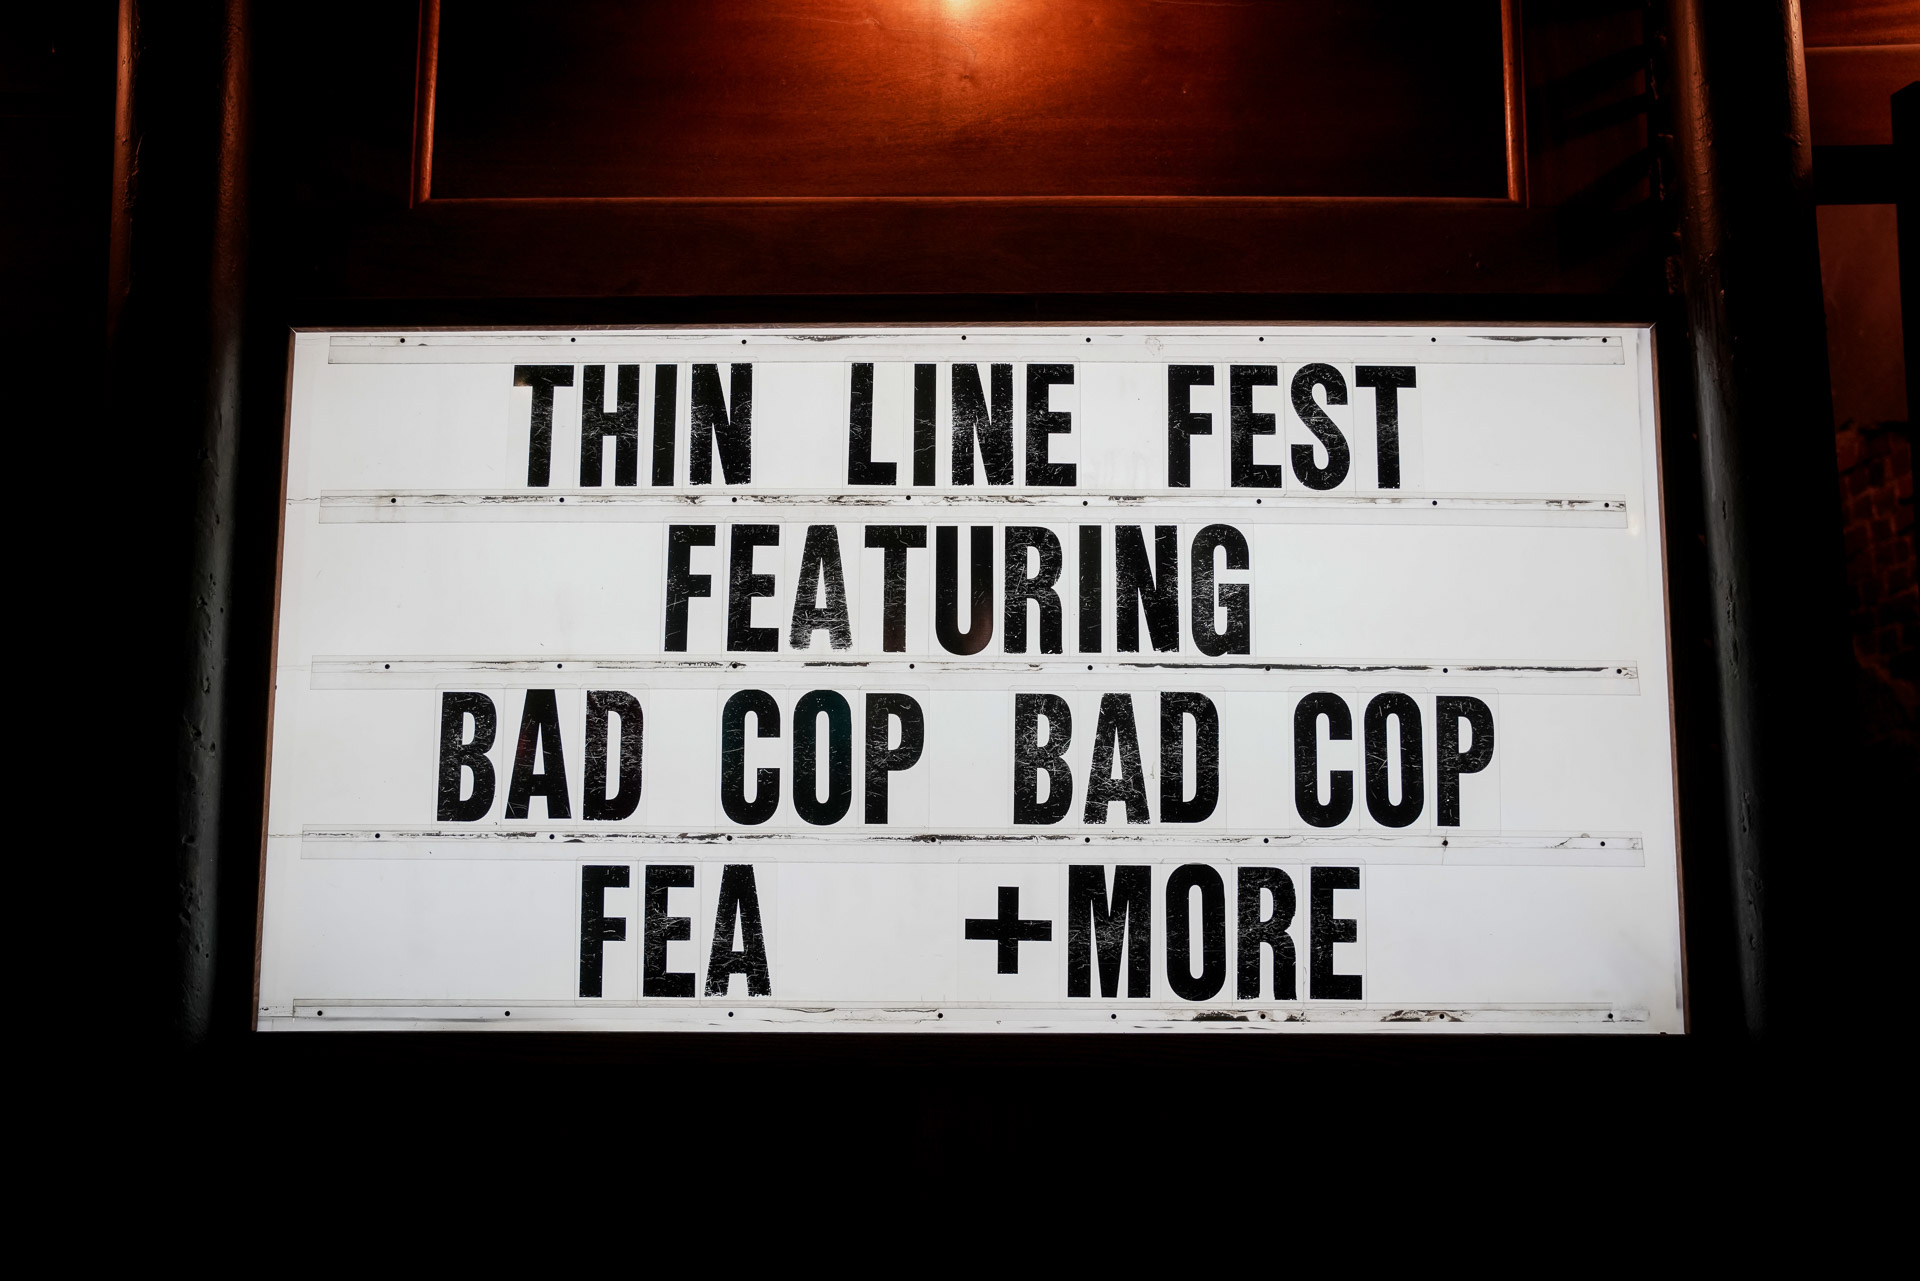 A marquee with band names